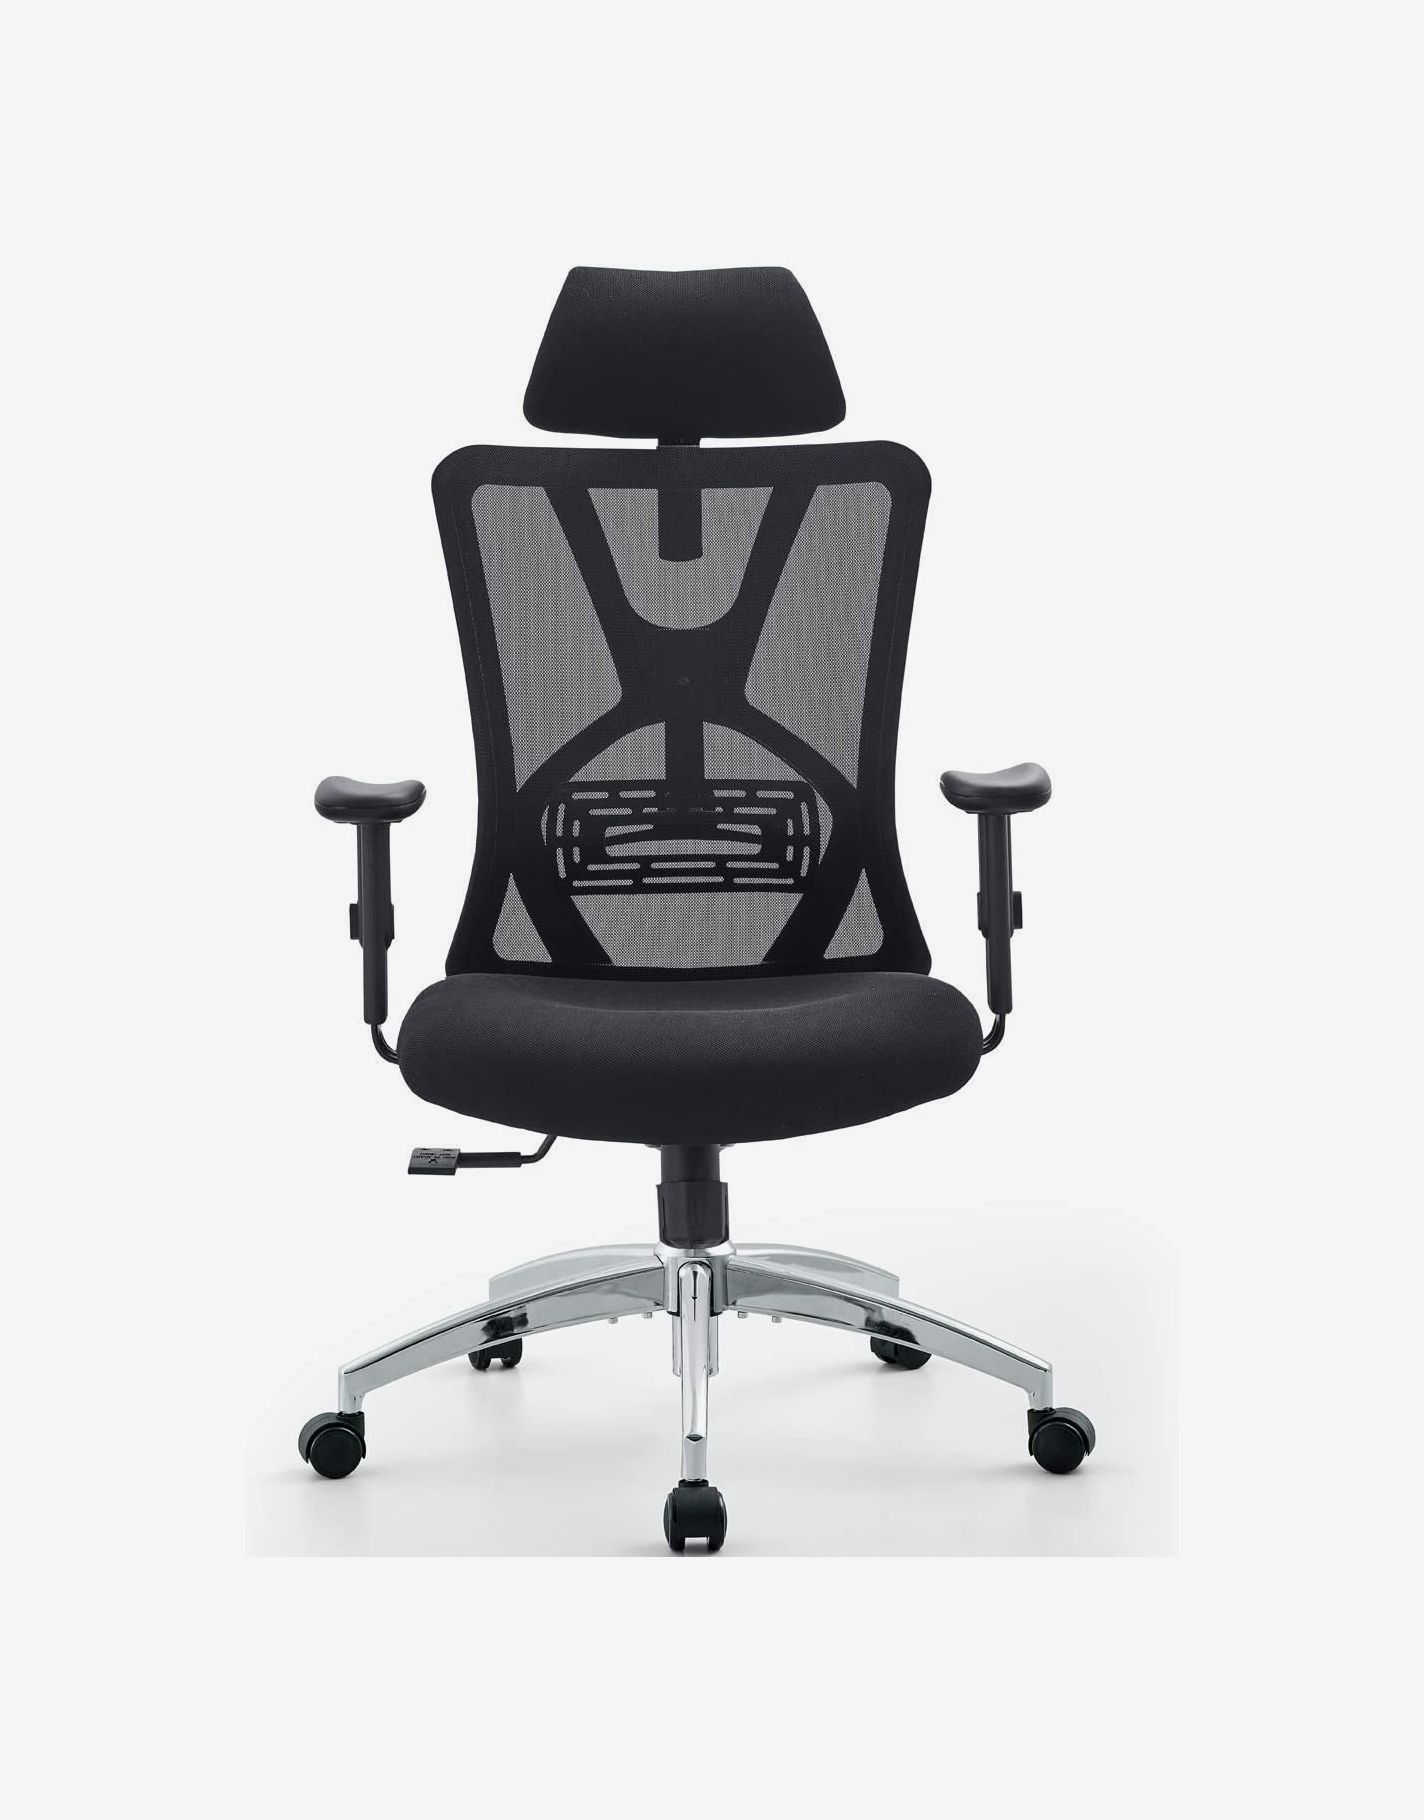 18 Best Ergonomic Office Chairs 2021, What Are The Best Ergonomic Office Chairs